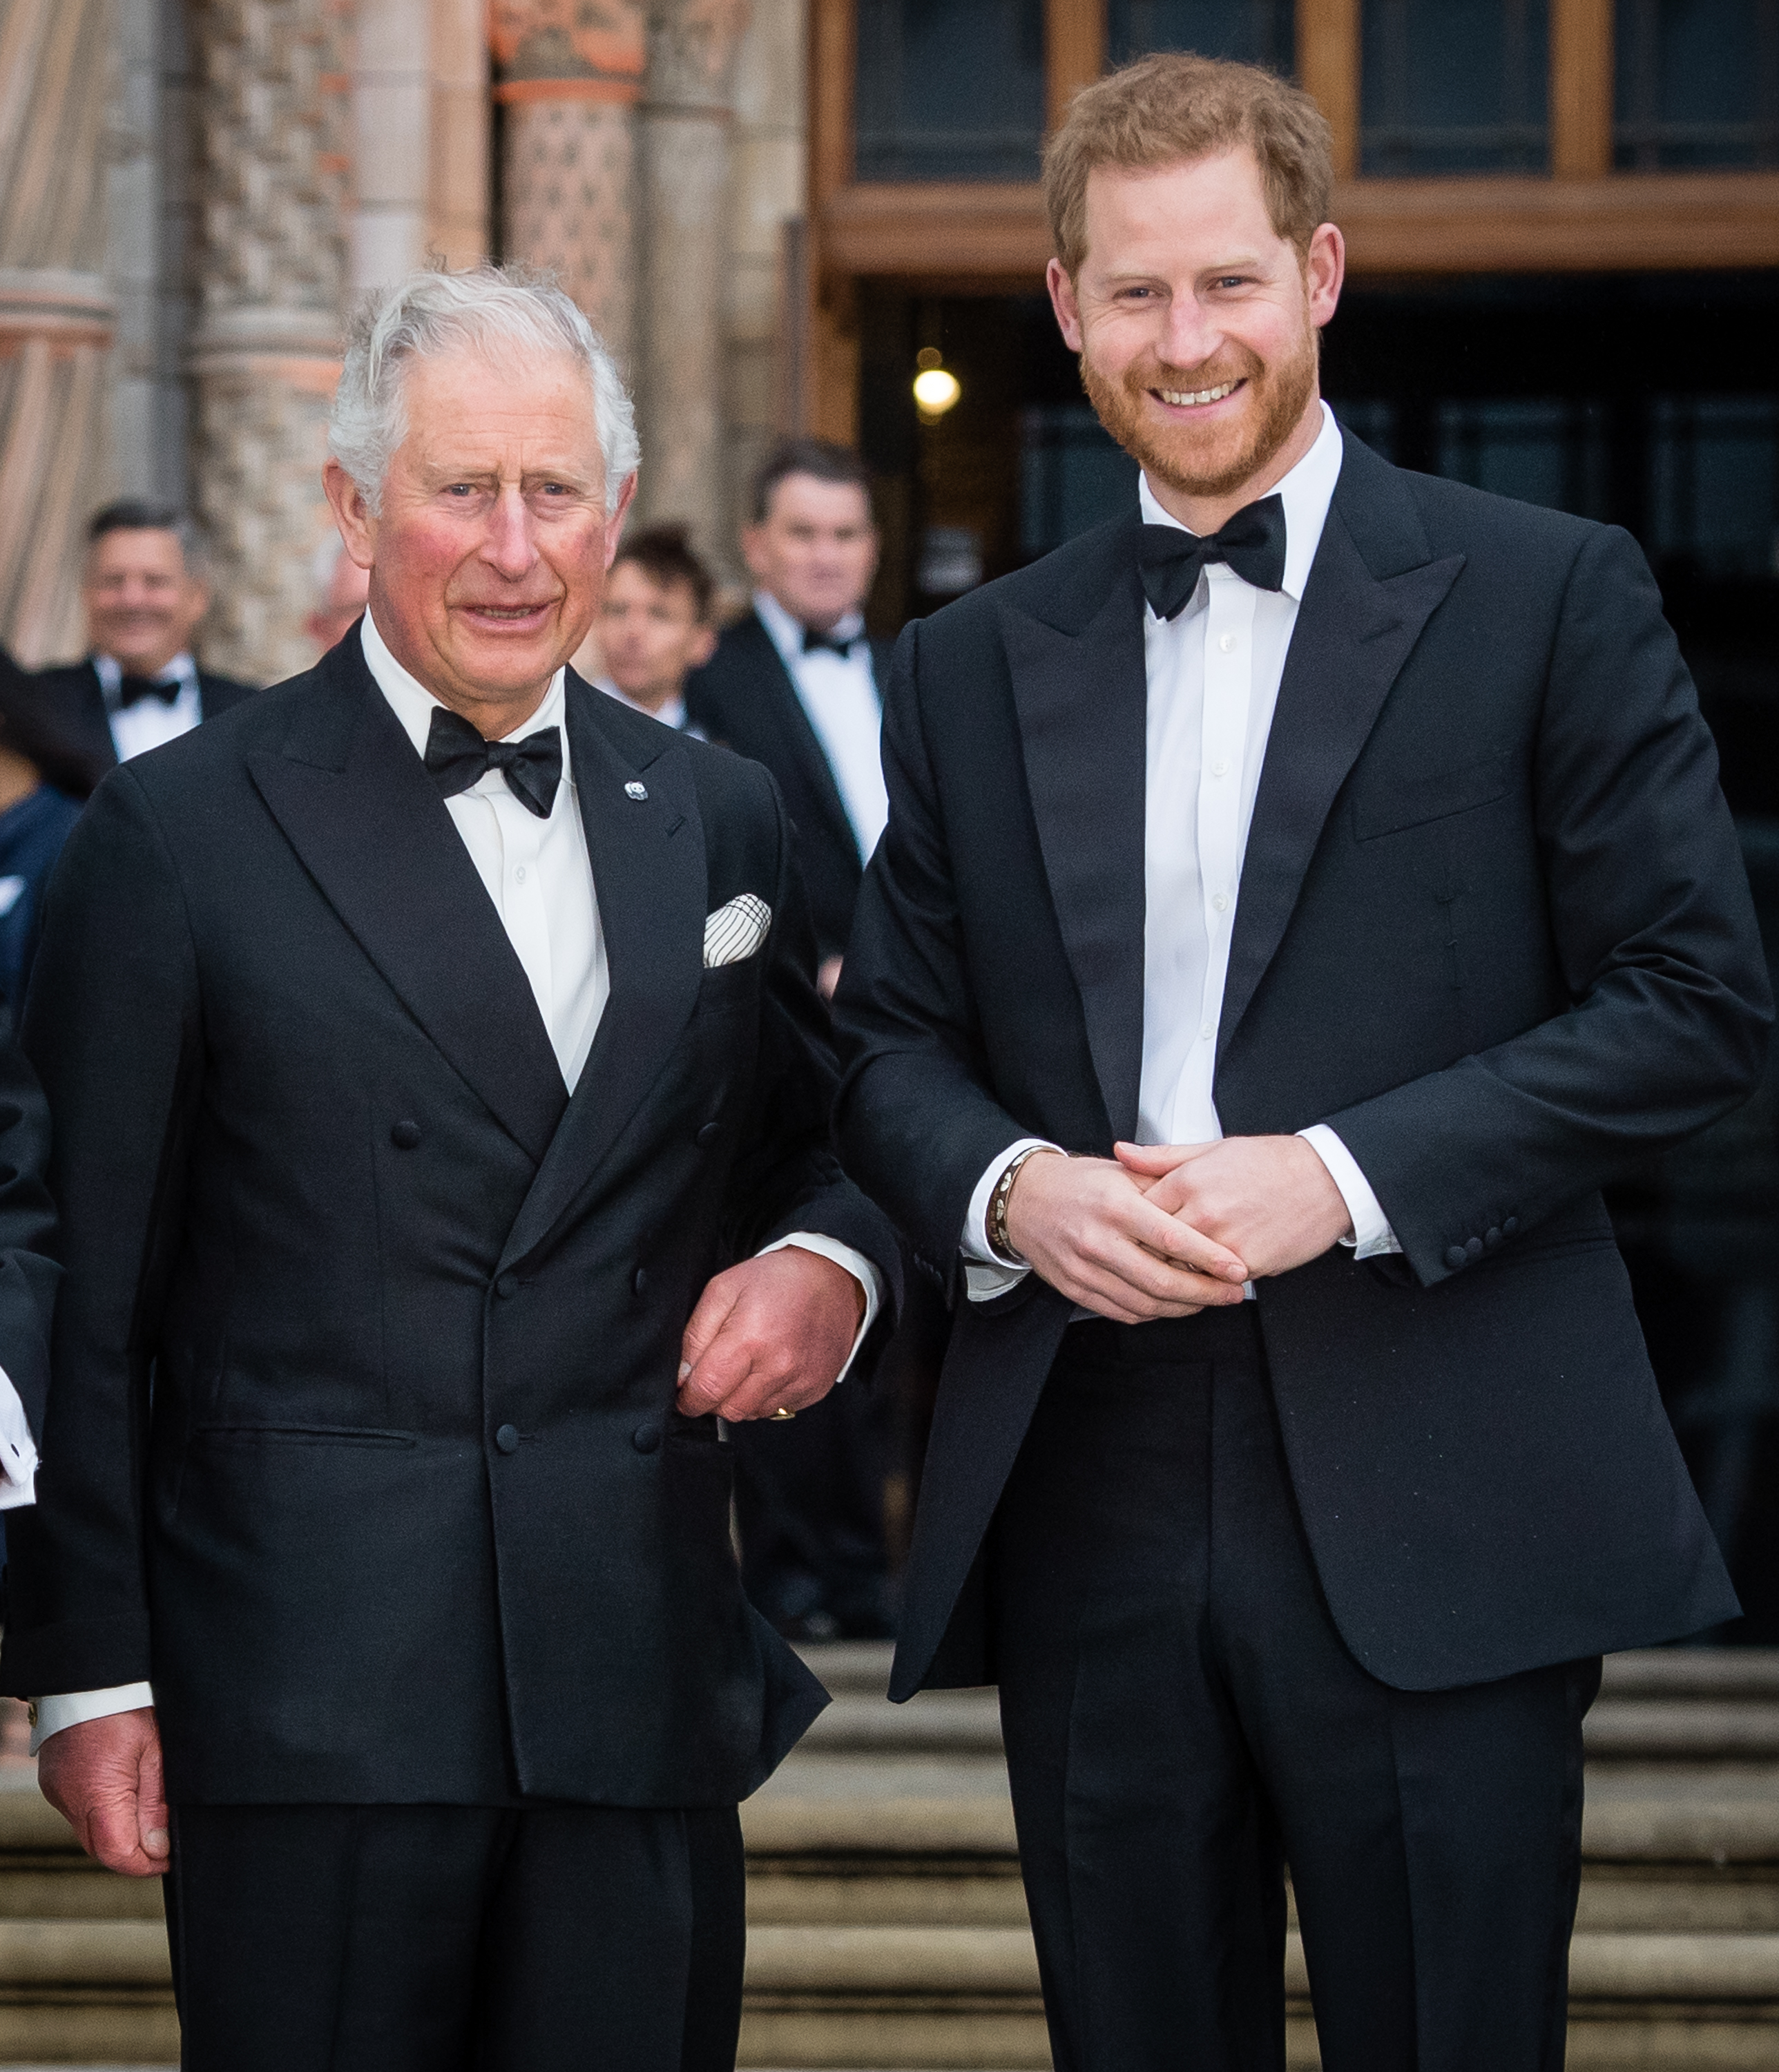 King Charles and Prince Harry attend the "Our Planet" global premiere at Natural History Museum on April 4, 2019 in London, England. | Source: Getty Images